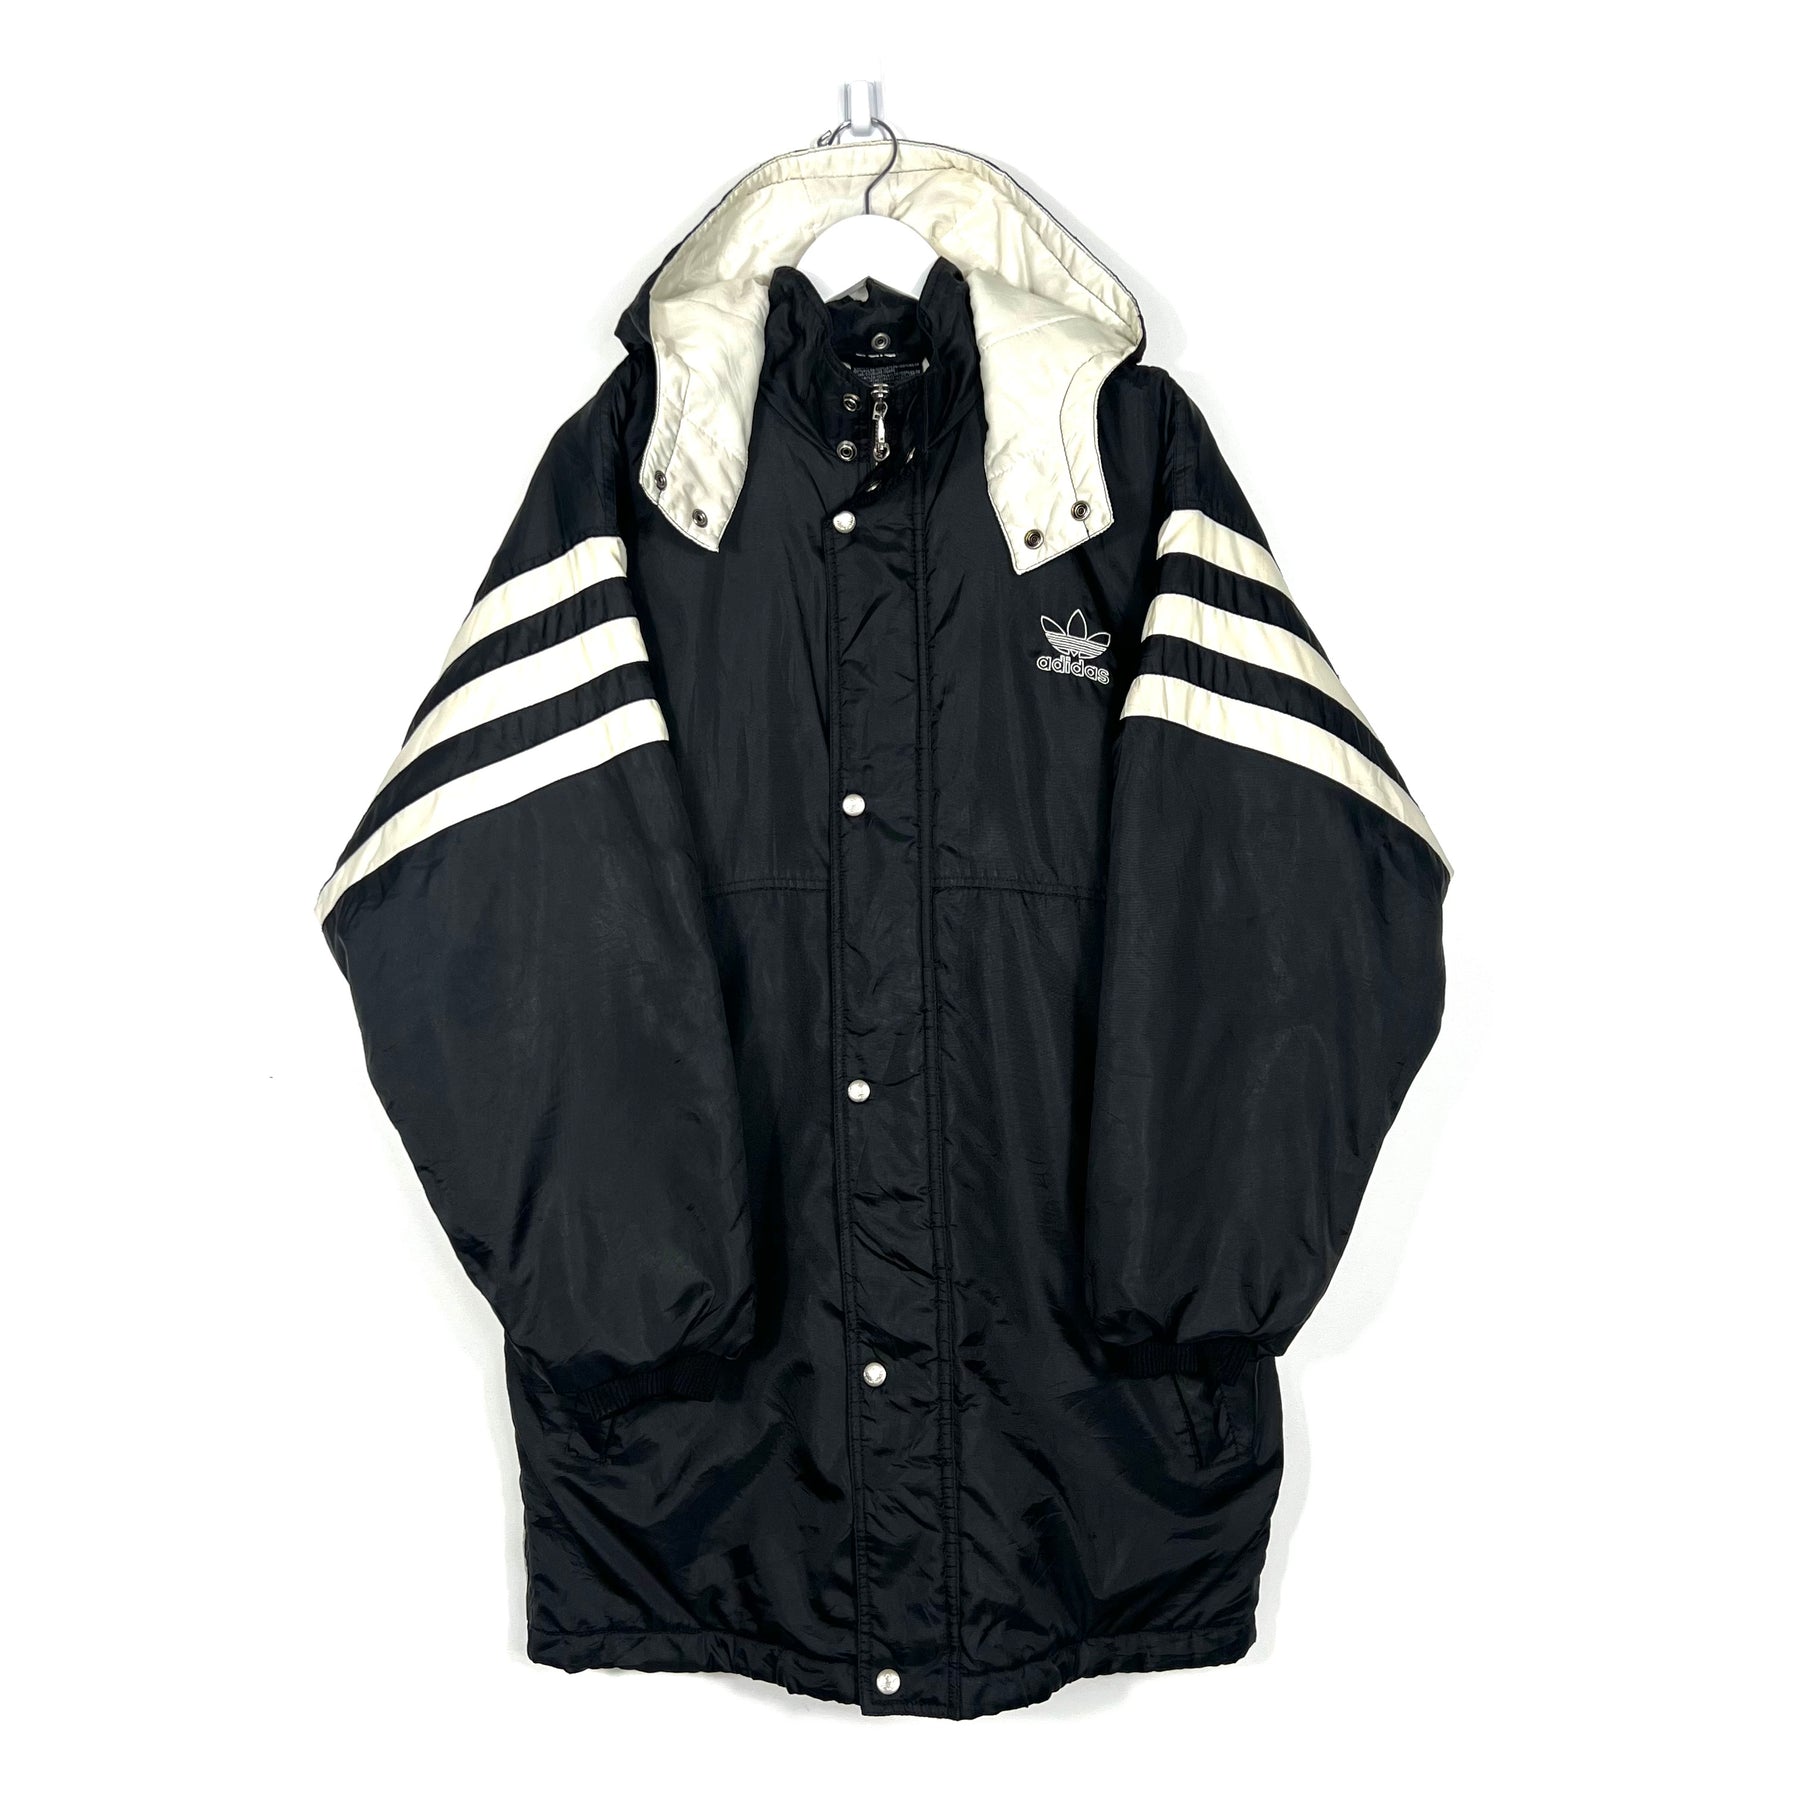 Vintage Adidas Spell Out Insulated Coat - Women's Medium